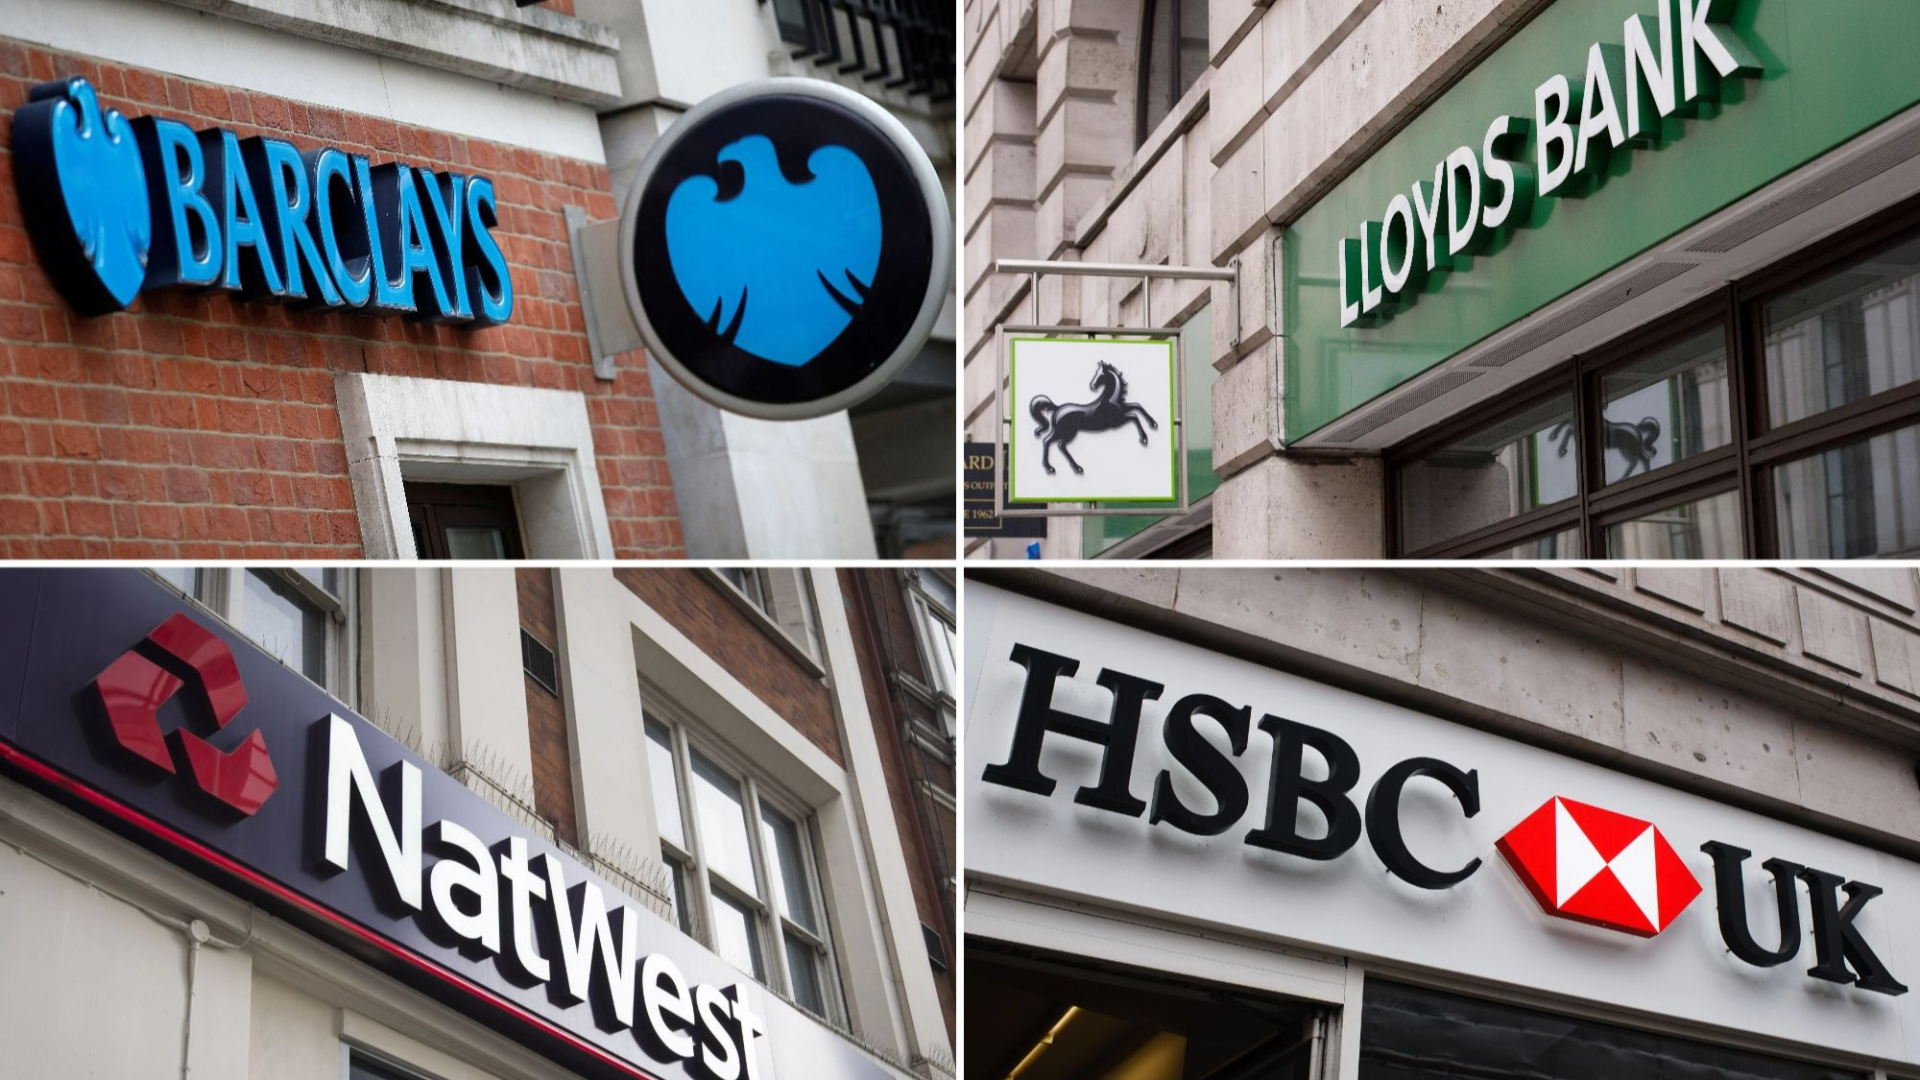 Although not all products, HSBC, NatWest, Barclays, and Leeds Building Society have increased their fixed-term loan rates.